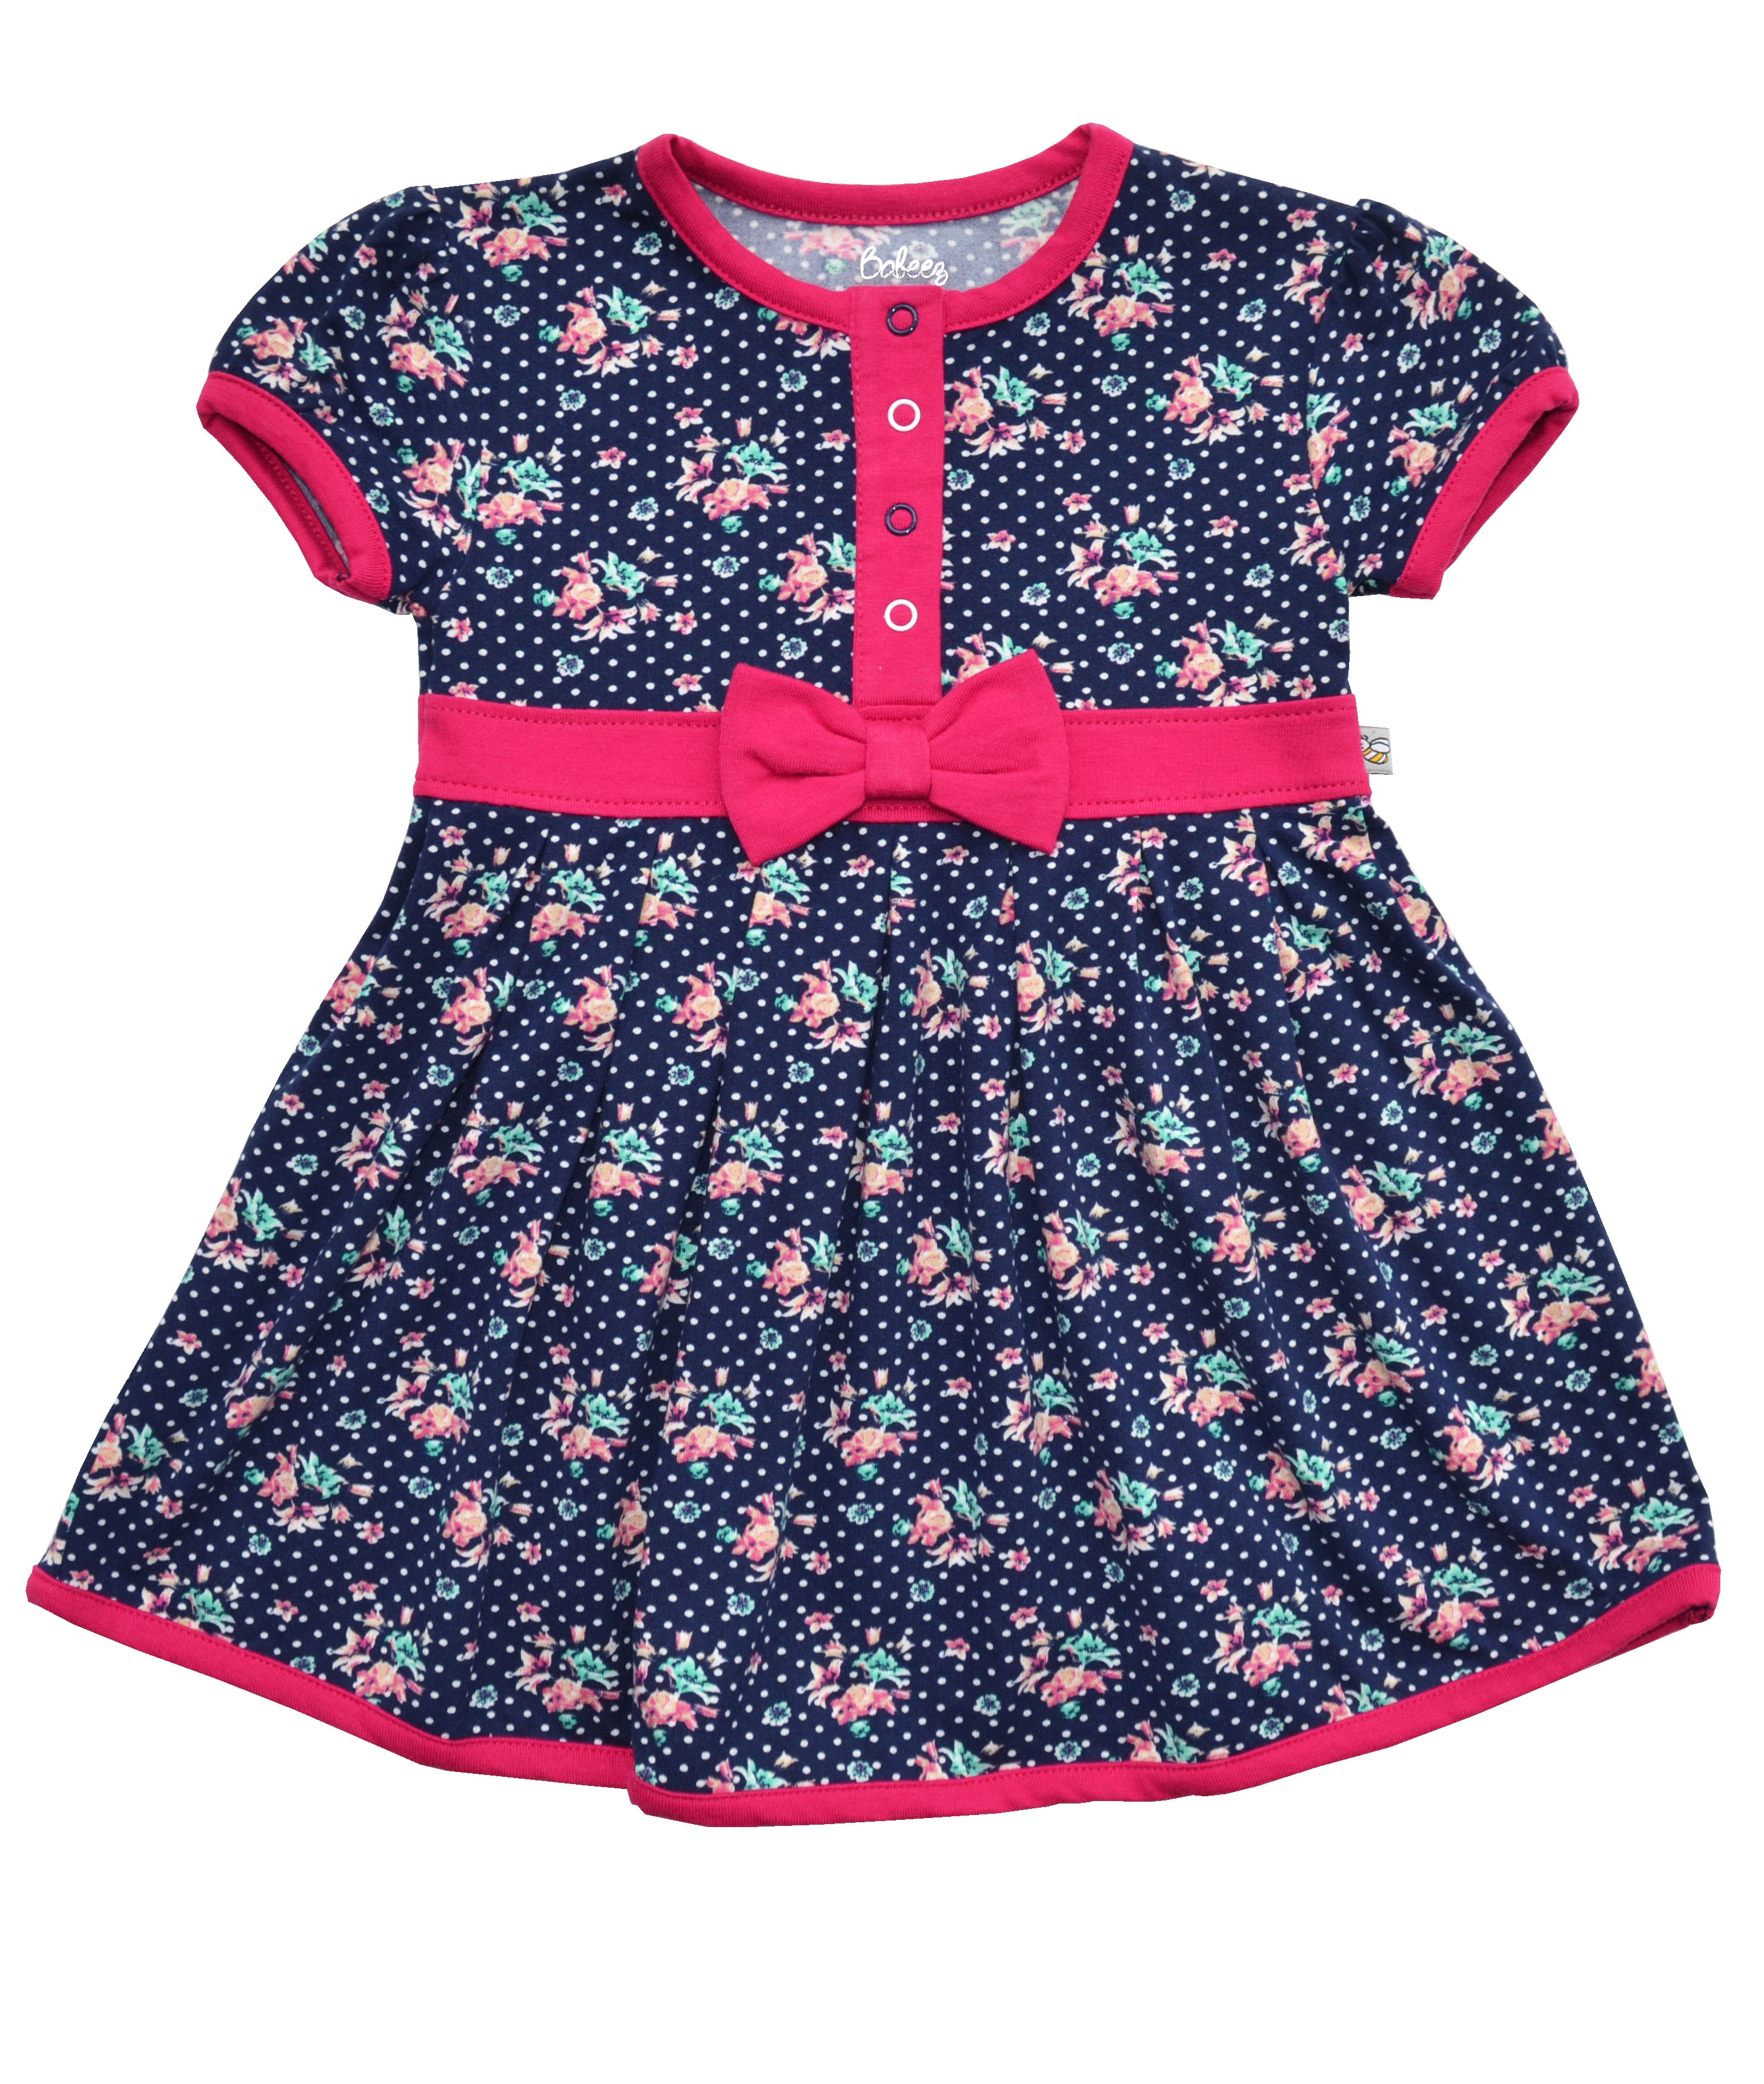 Babeez | Allover Flower Print on Navy Dress with Pink Bow (95% Cotton 5% Elasthan Jersey) undefined